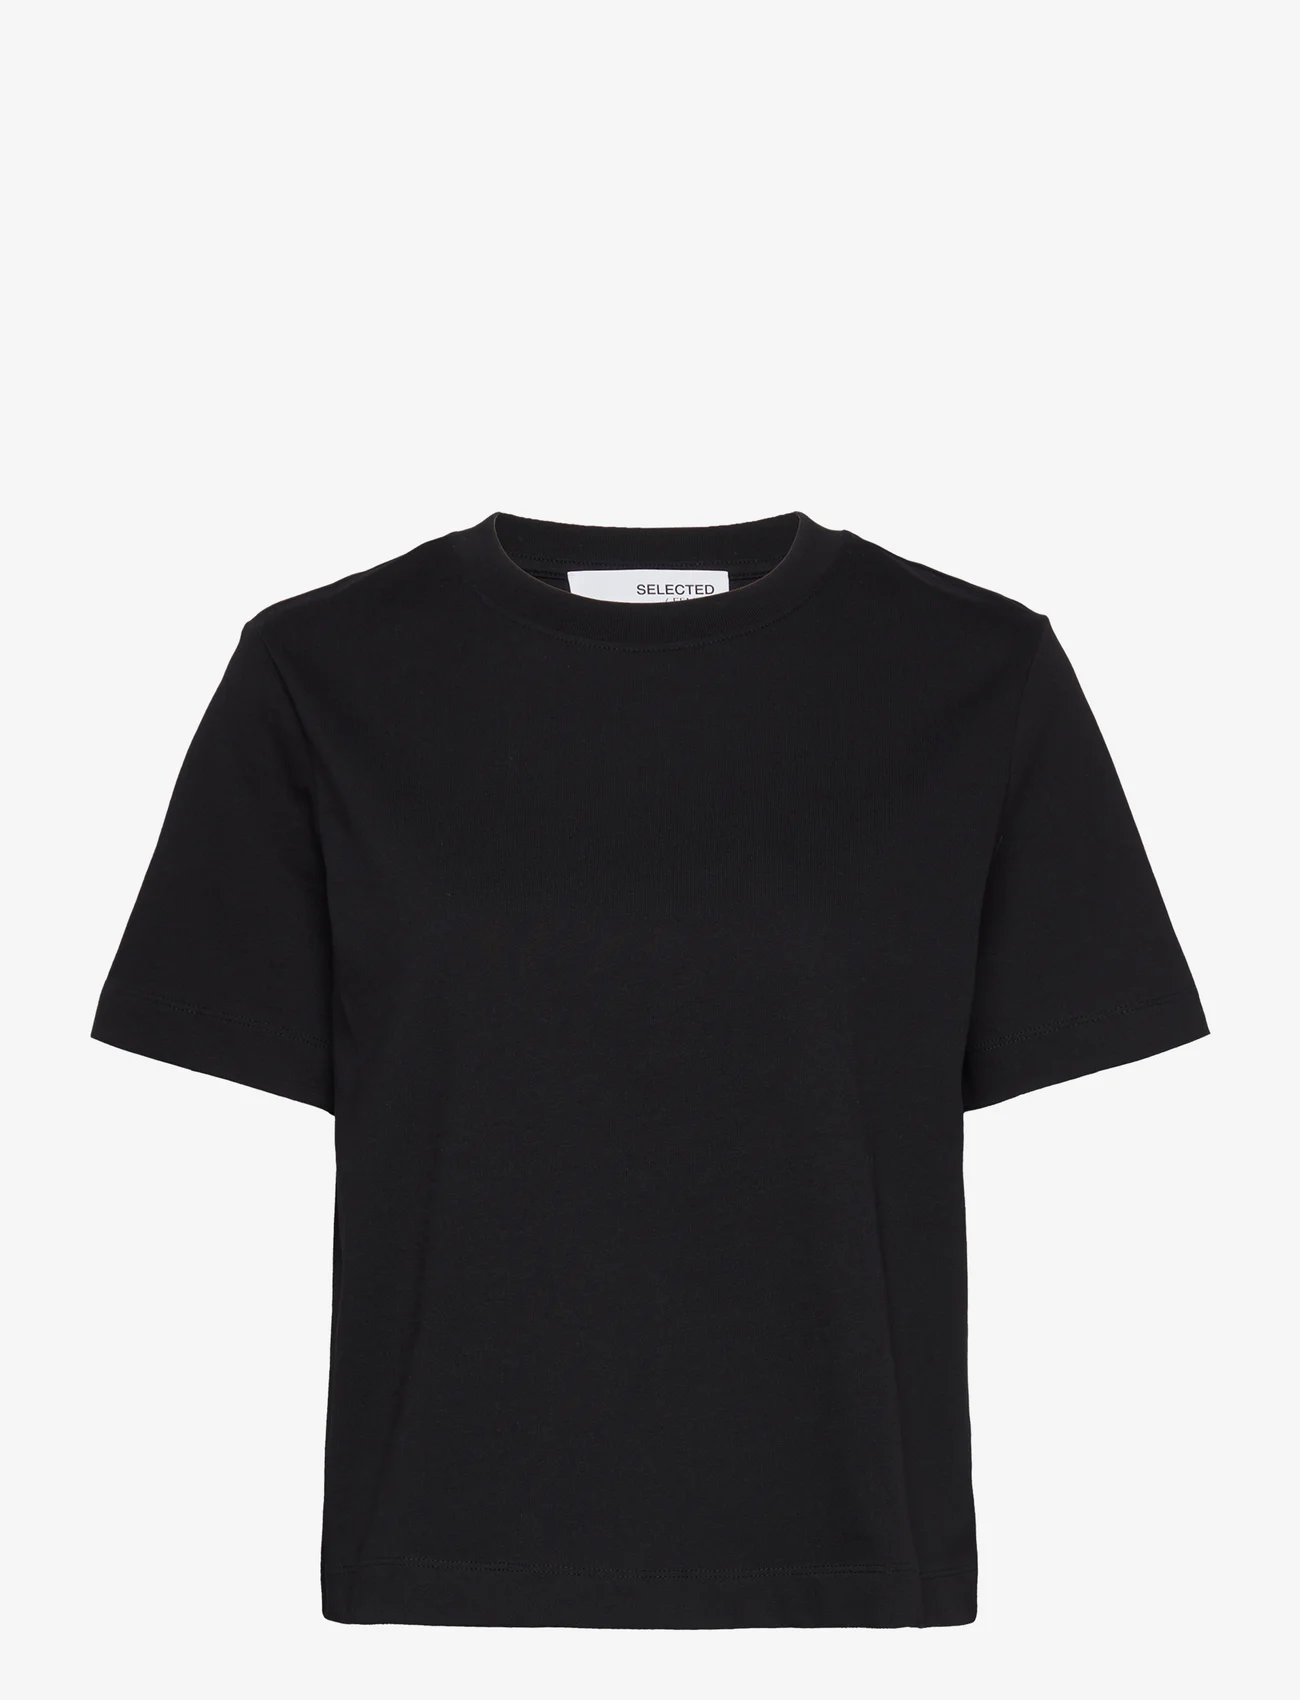 Selected Femme - SLFESSENTIAL SS BOXY TEE NOOS - t-shirts - black - 0